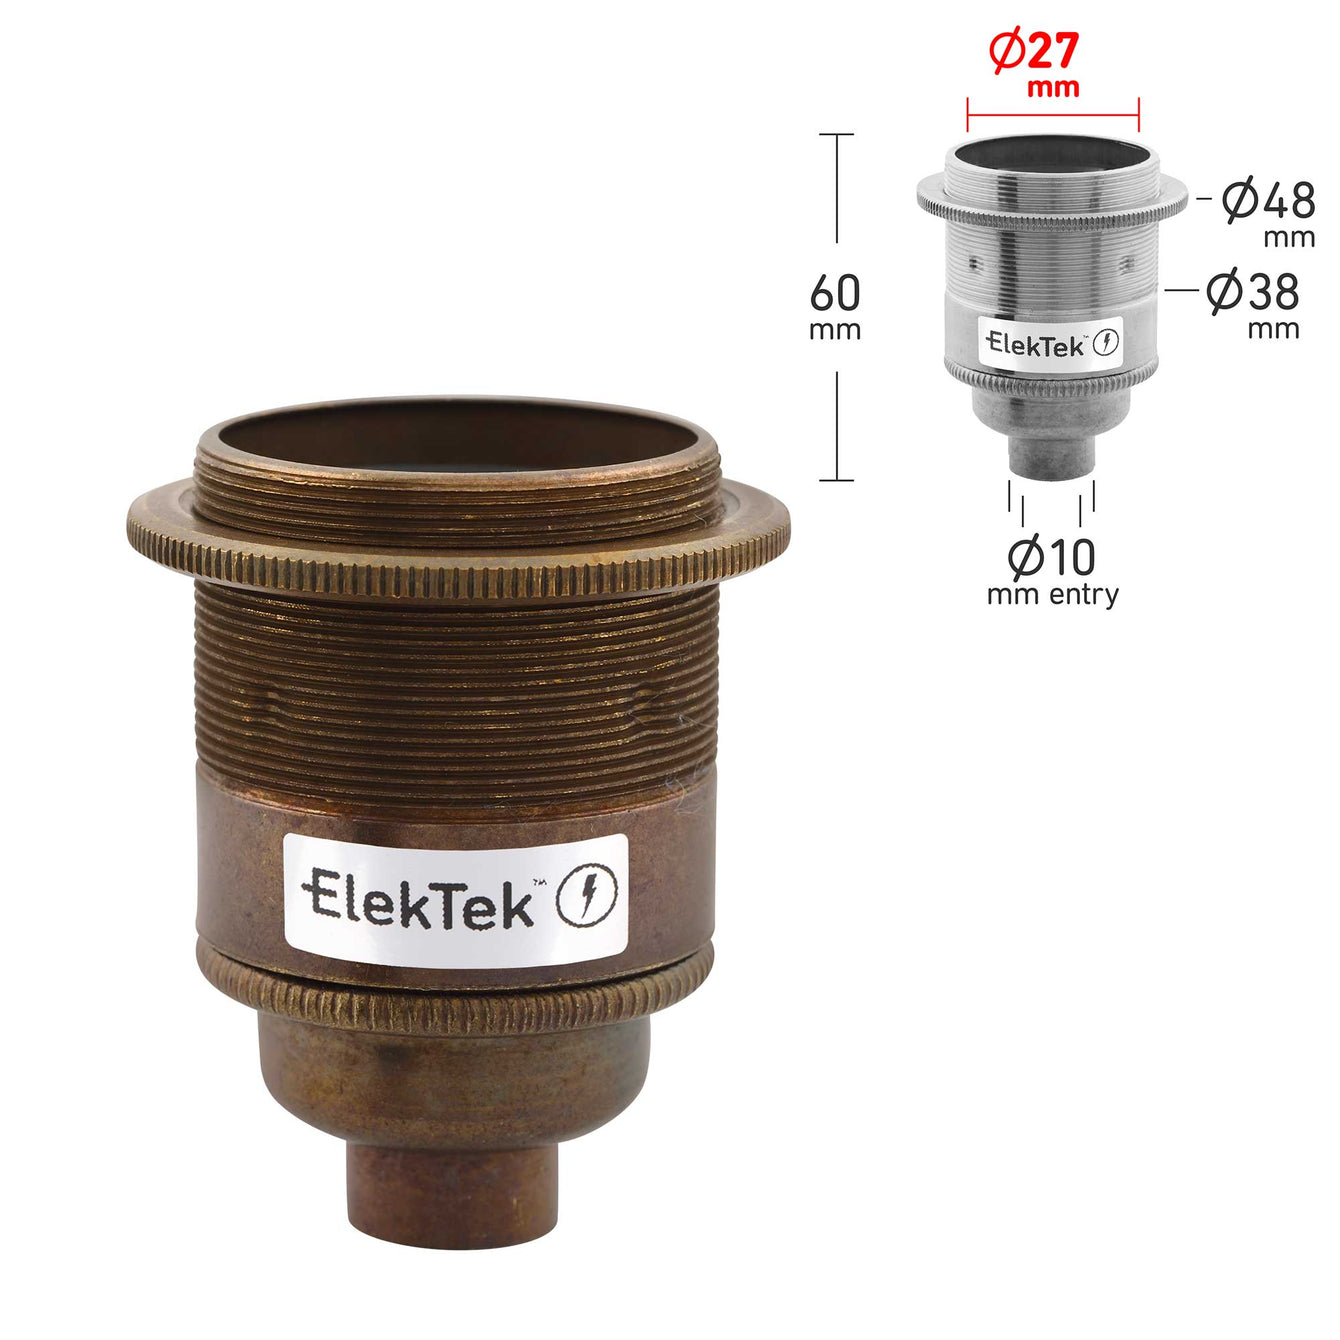 ElekTek ES Edison Screw E27 Lamp Holder With Shade Ring 10mm or Half Inch Entry Ideal for Vintage Filament Bulbs Brass - Buy It Better Antique Brass / Half Inch